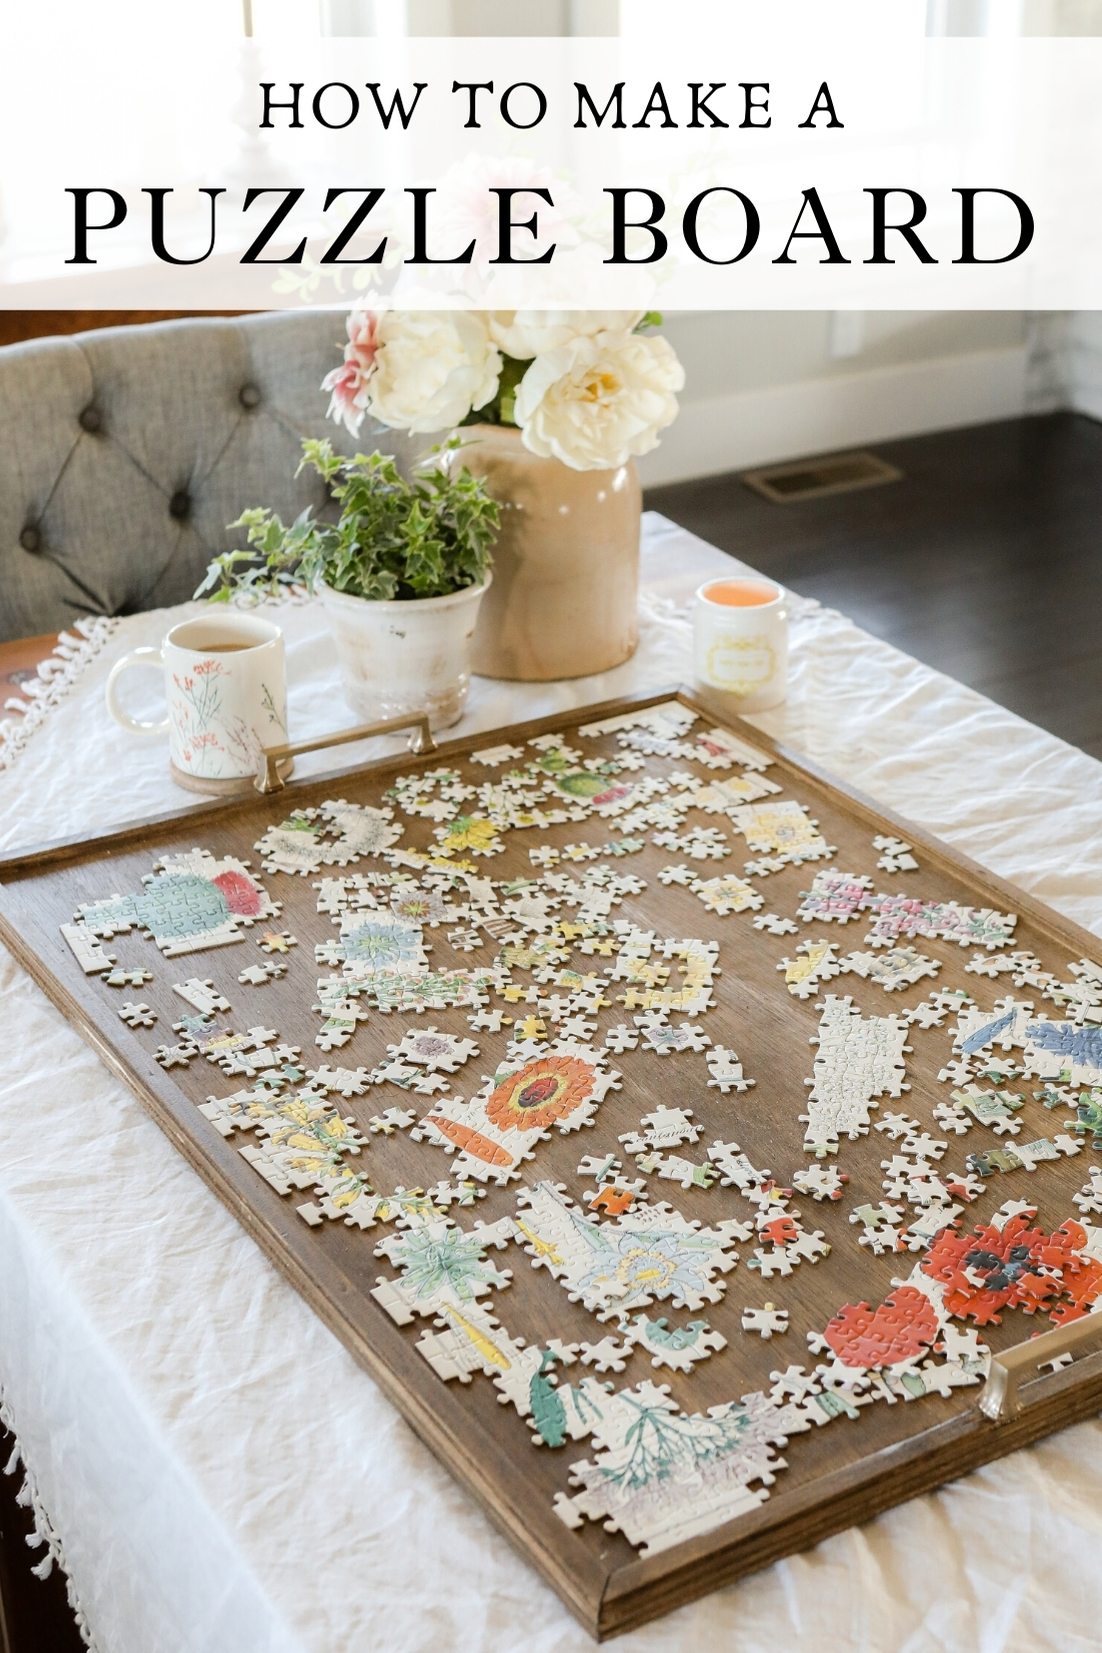 How to make a puzzle board